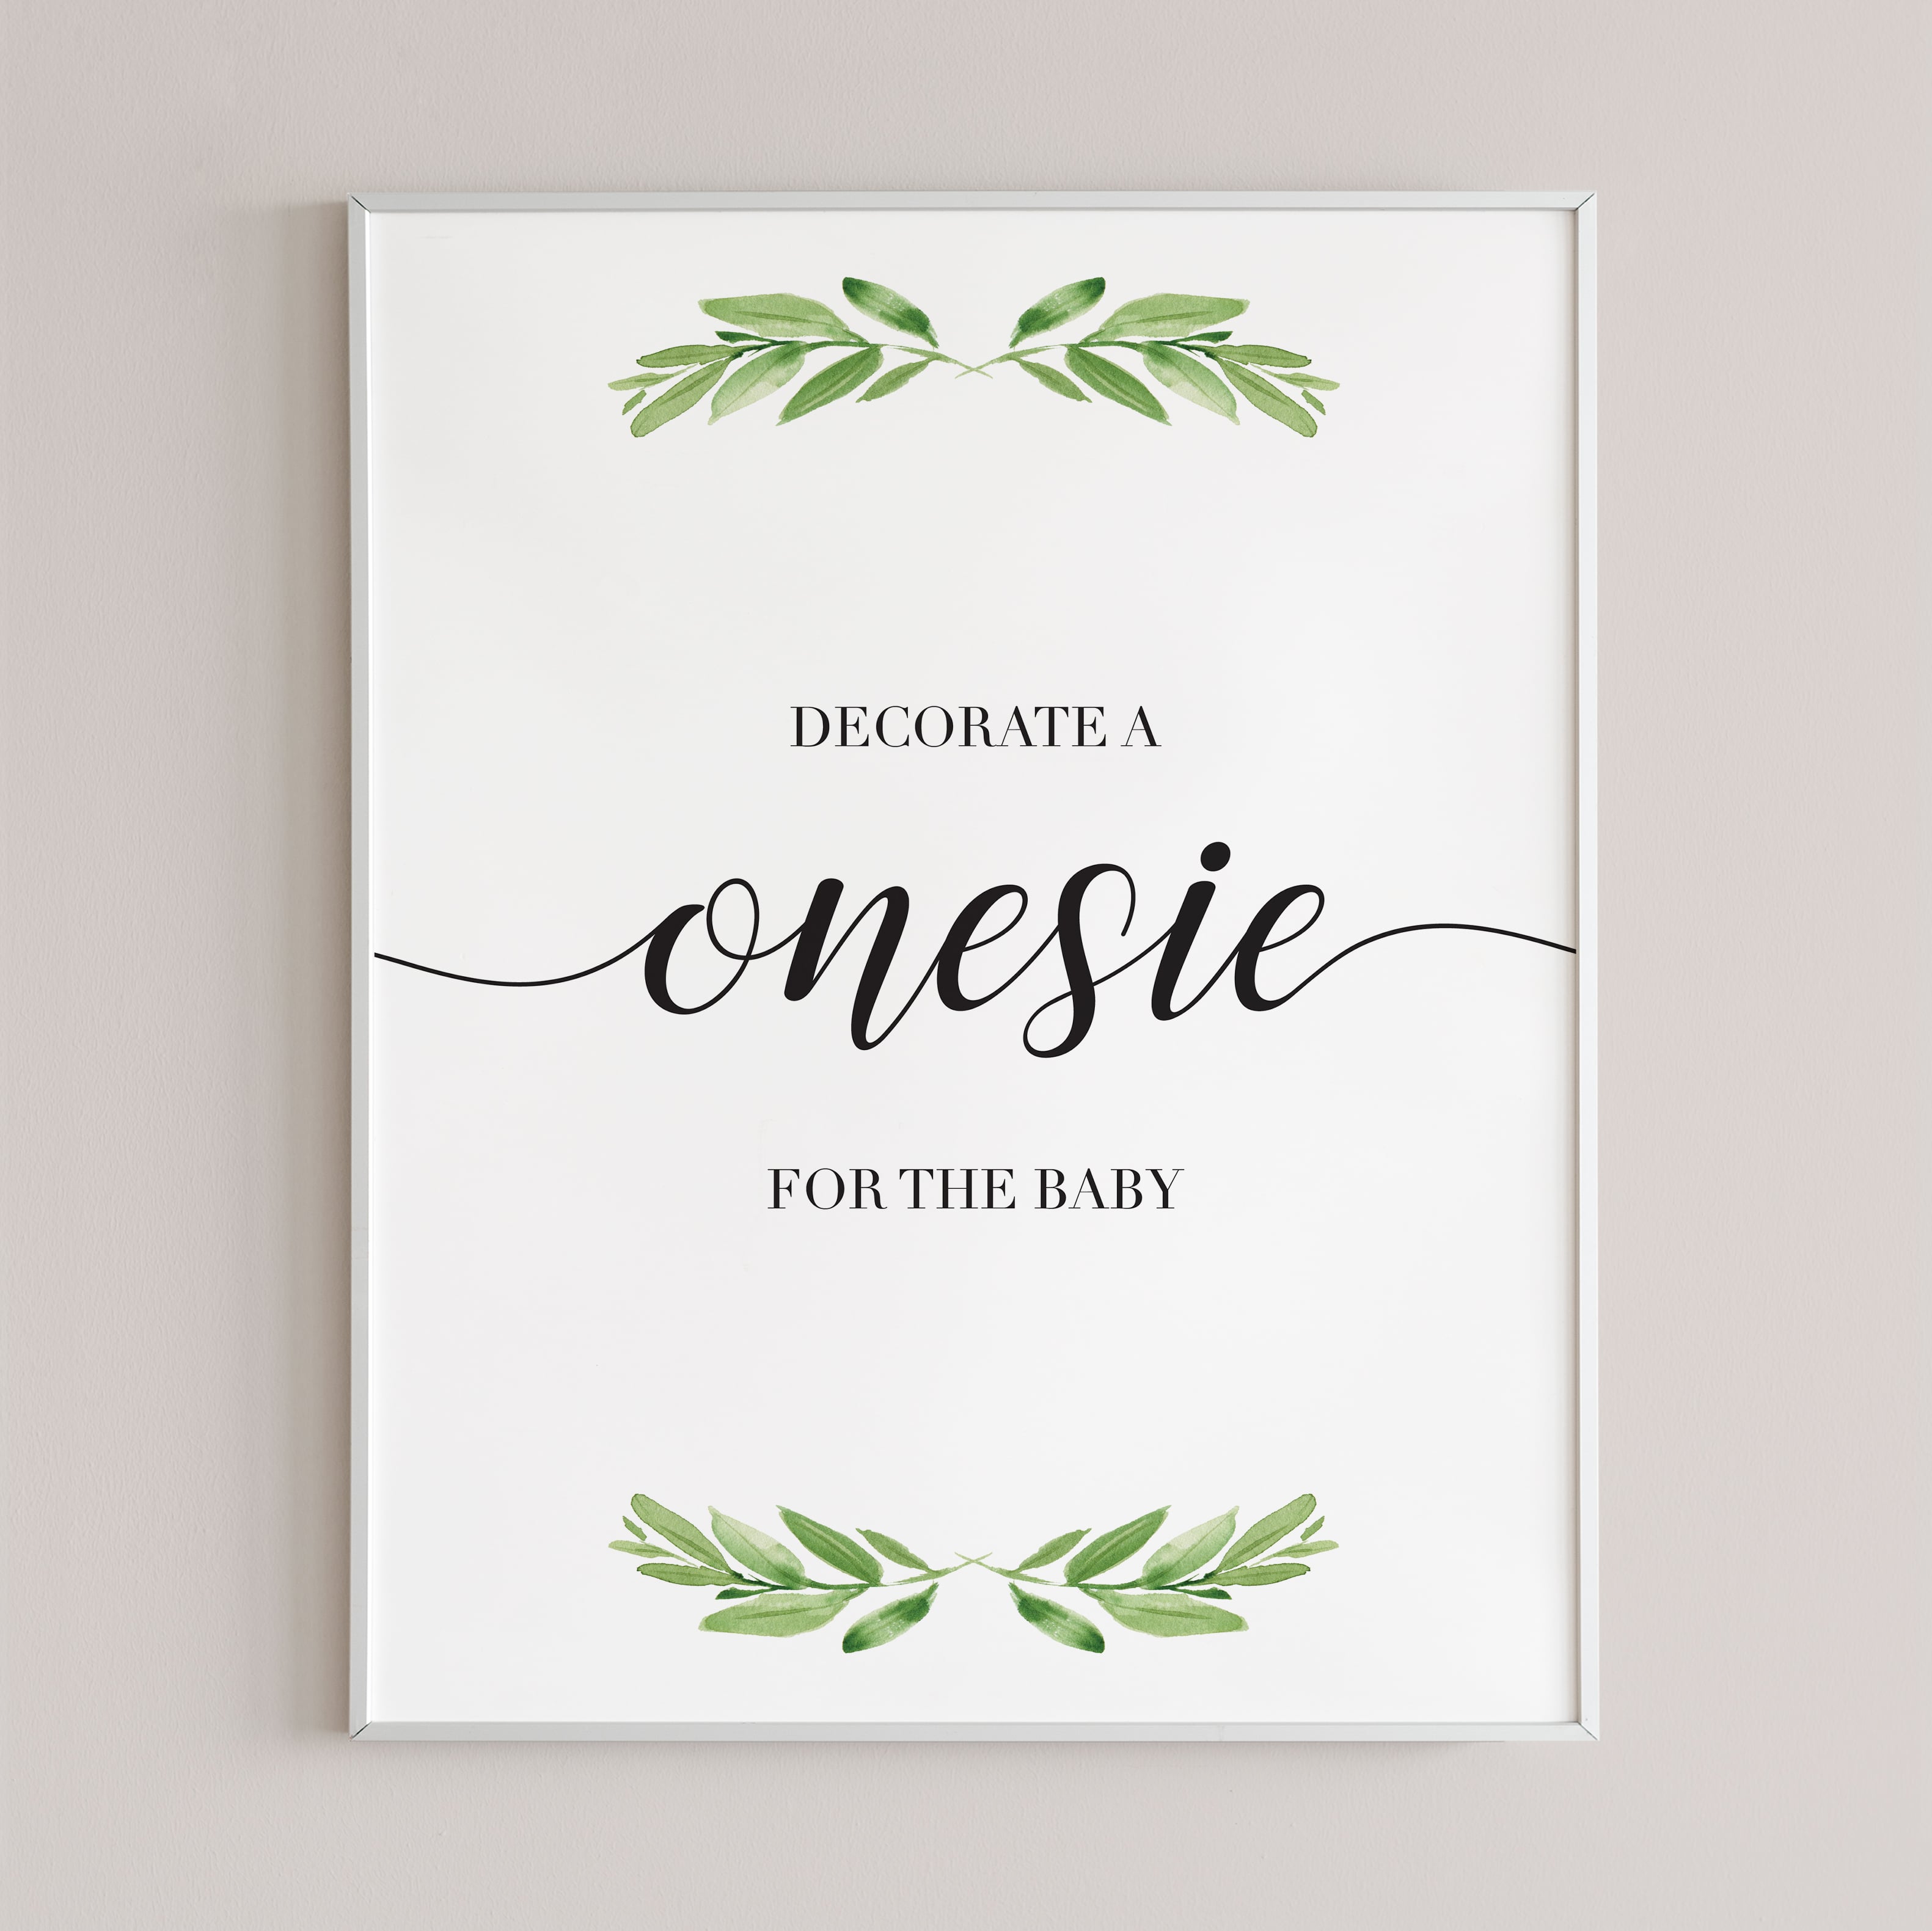 Onesie sign baby shower games green leaves instant download by LittleSizzle